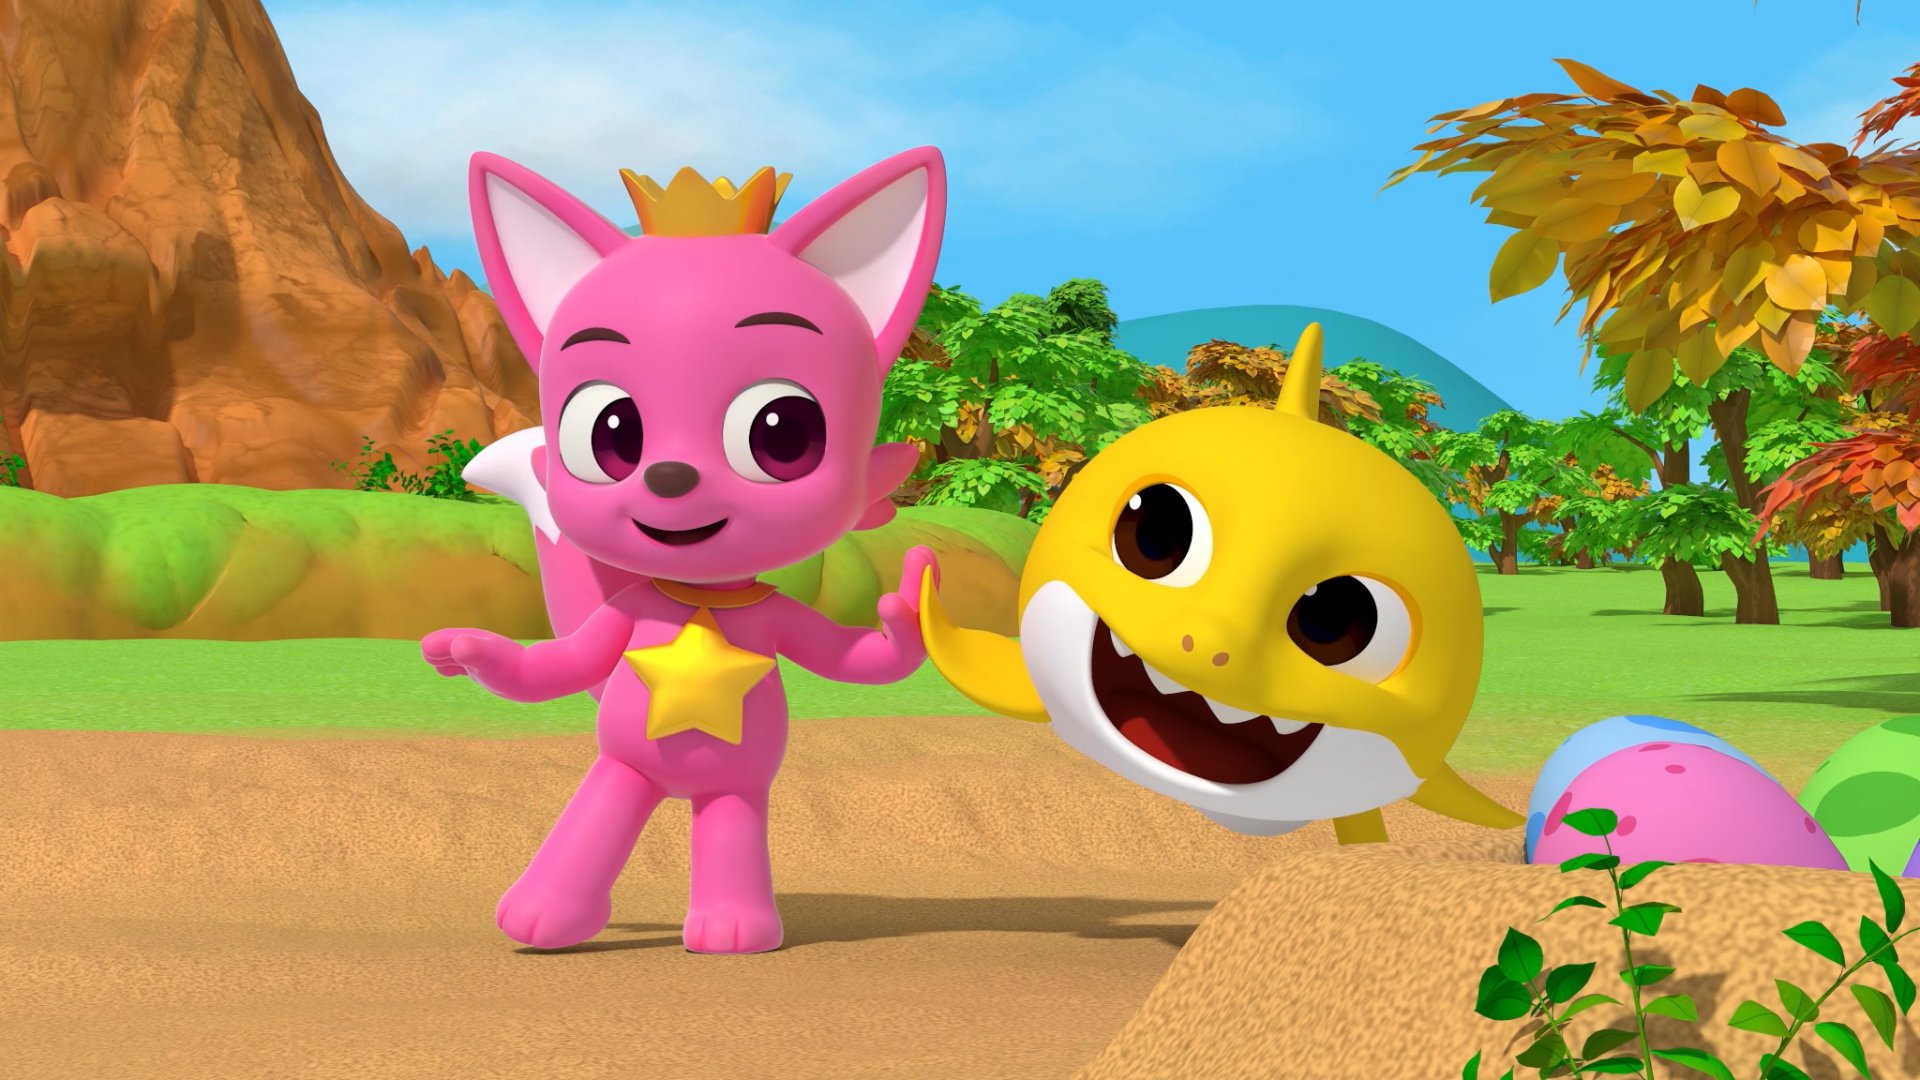 Pinkfong & Baby Sharks Space Adventure